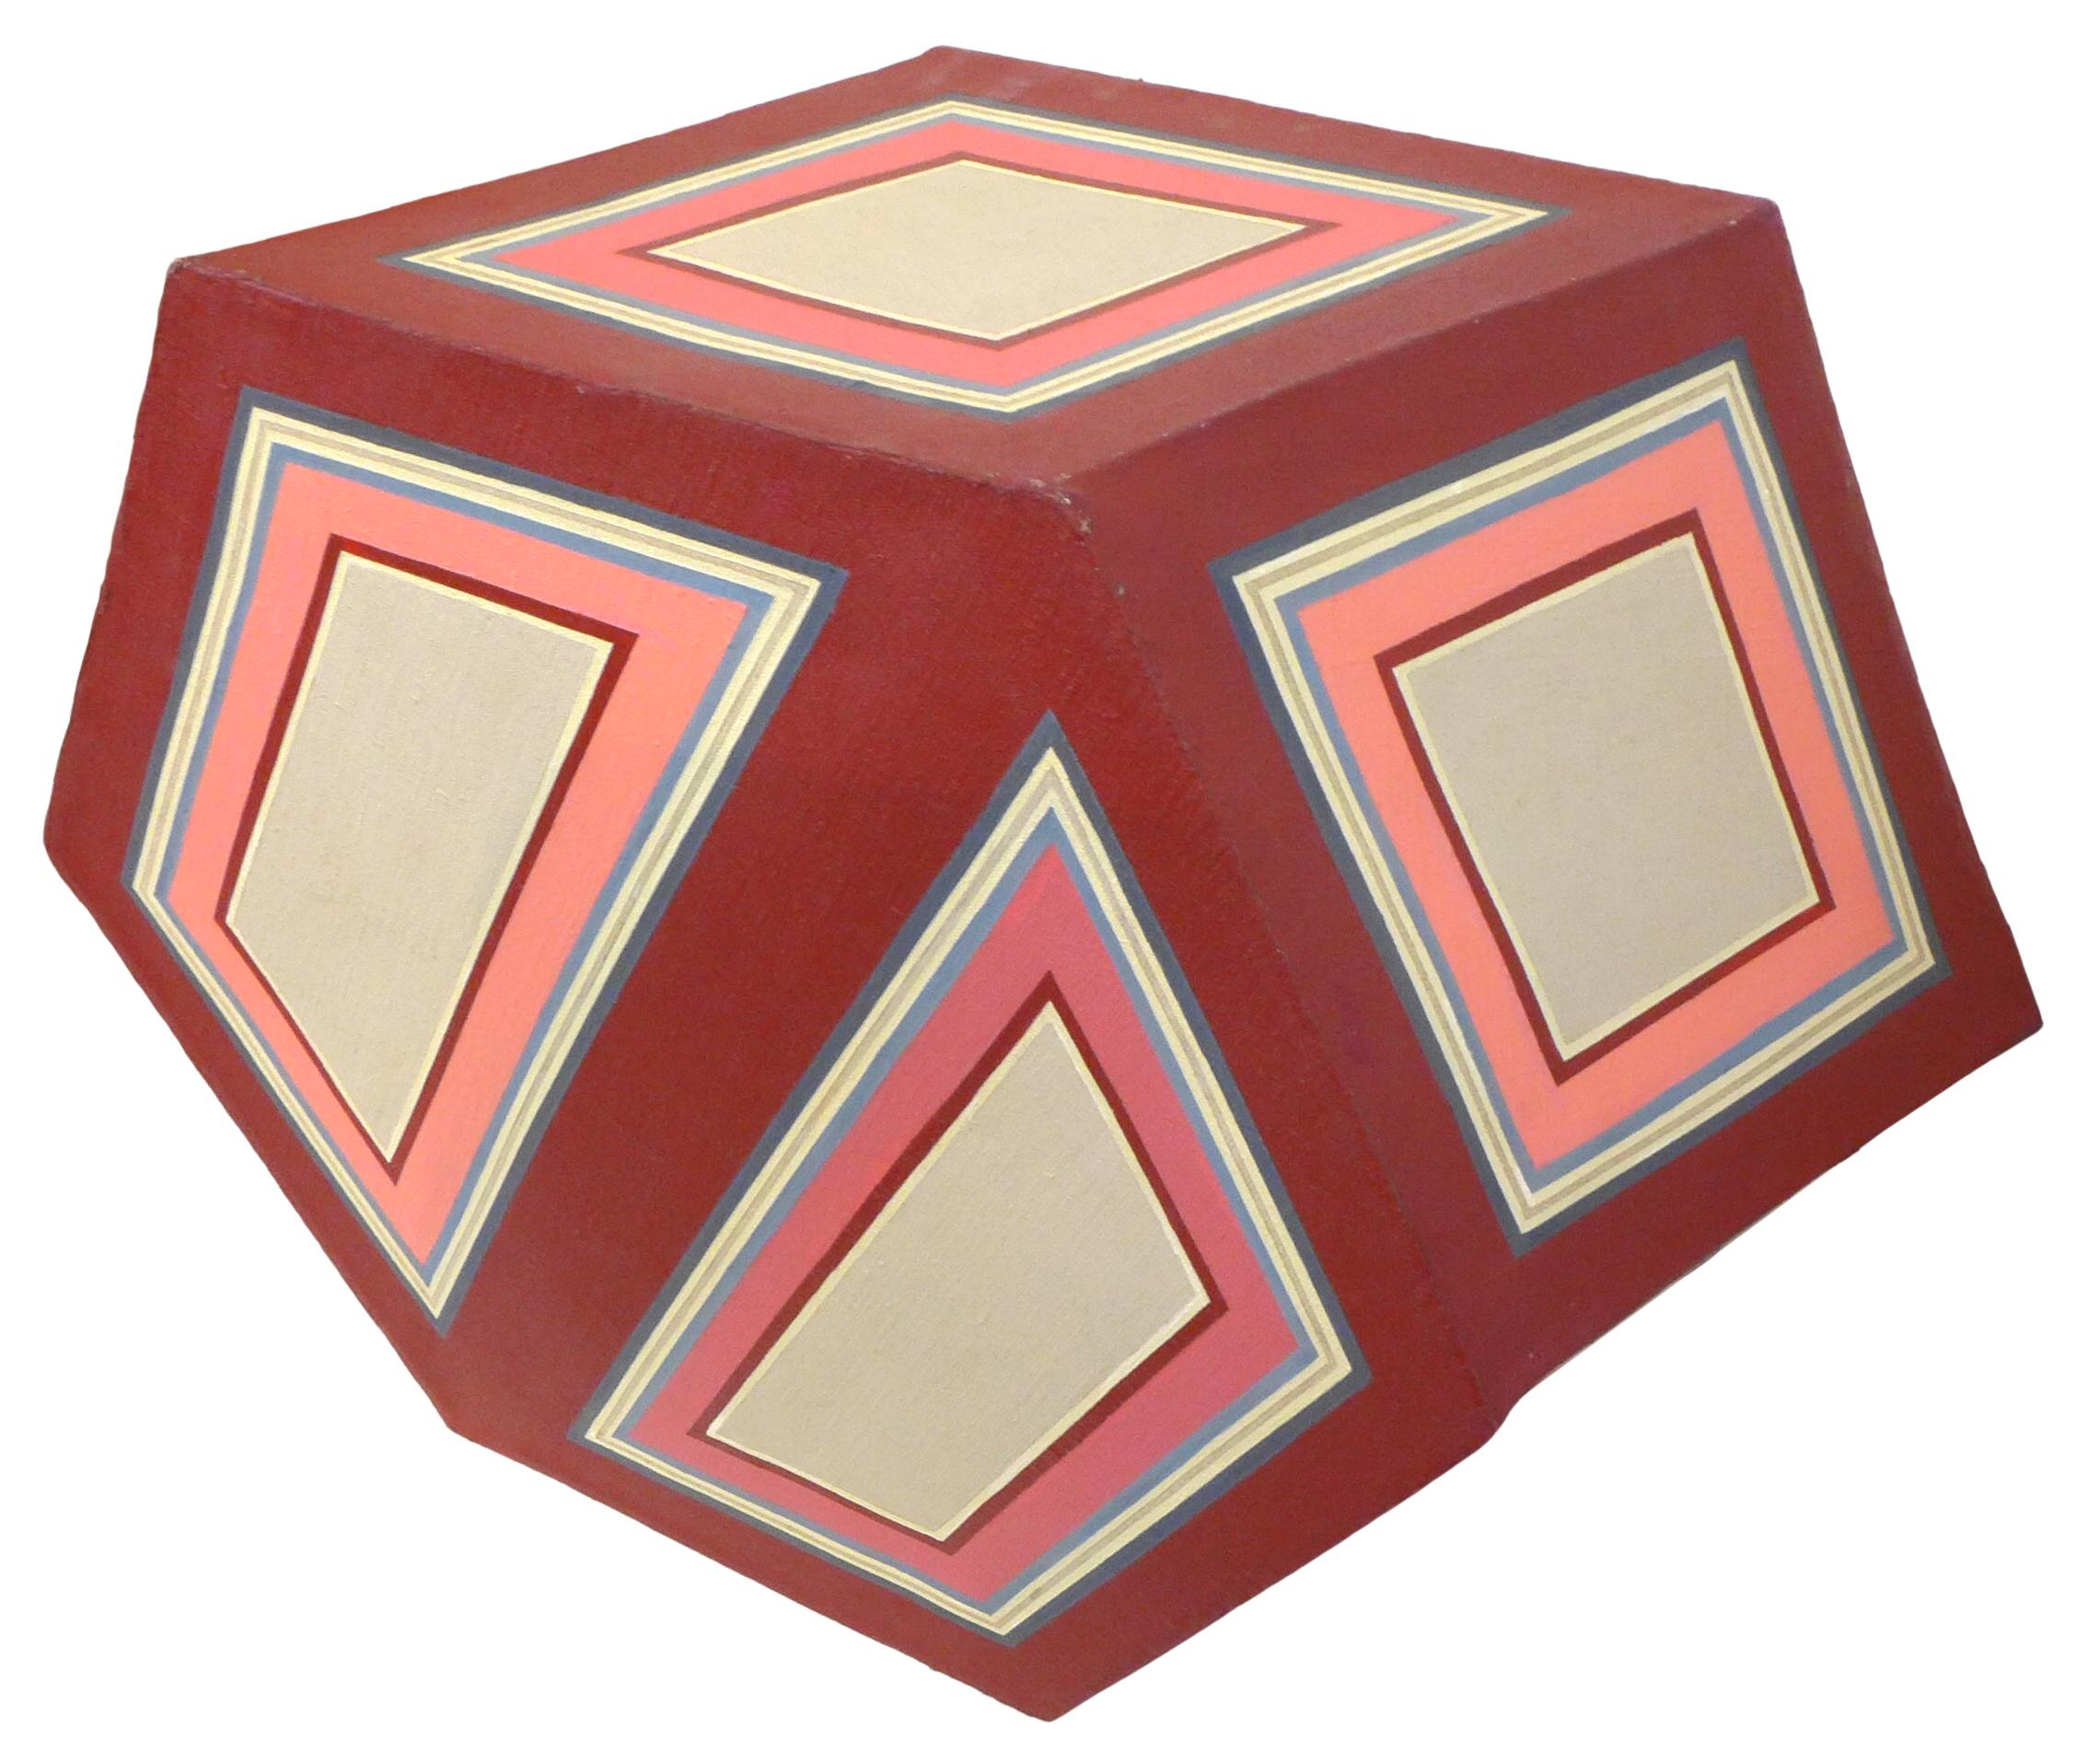 A wonderful and unusual two-piece hard-edge freestanding painting sculpture. An offset hexagonal prism ring with a smaller partner hexagonal prism seemingly meant to fill the former's void, both adorned with multicolor trapezoids on each facet.